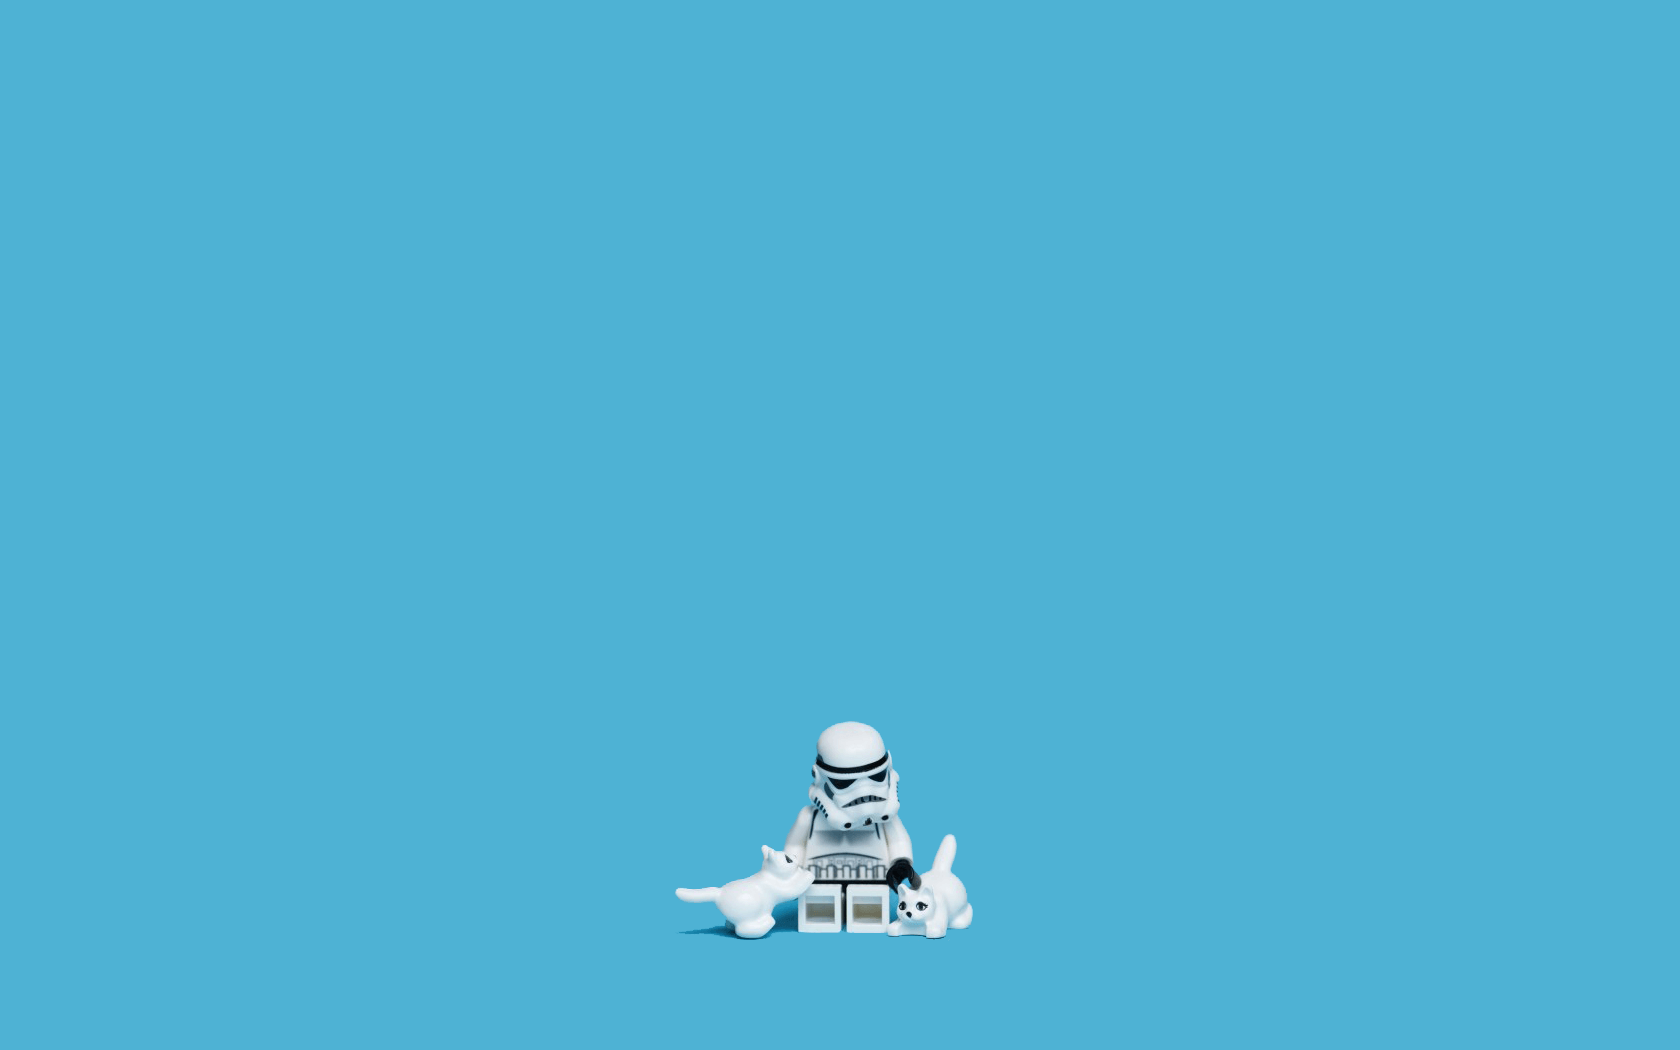 Android Star Wars Wallpapers